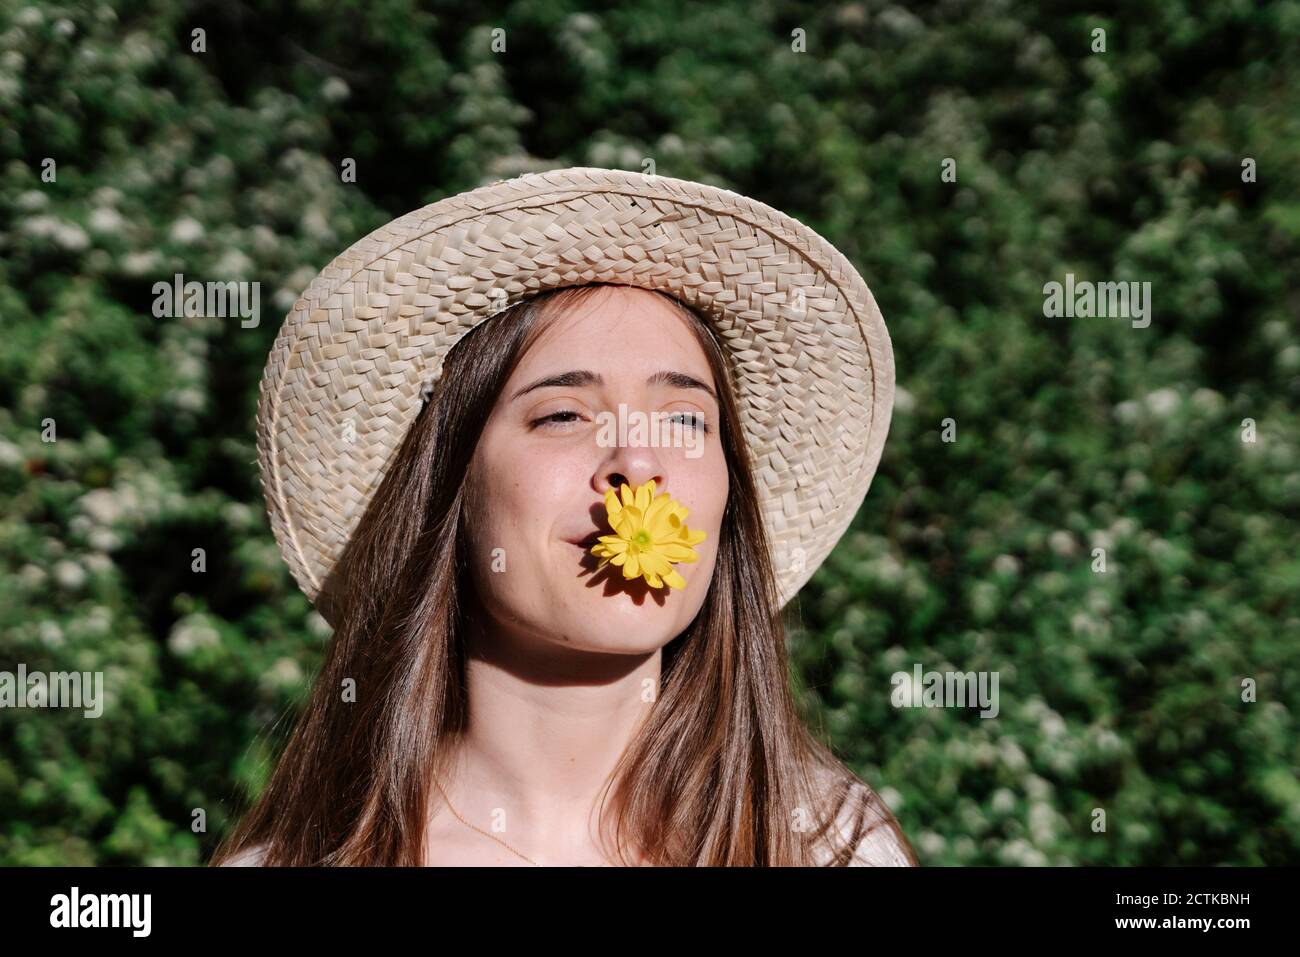 Young woman wearing hat while carrying yellow flower in mouth at park during spring Stock Photo